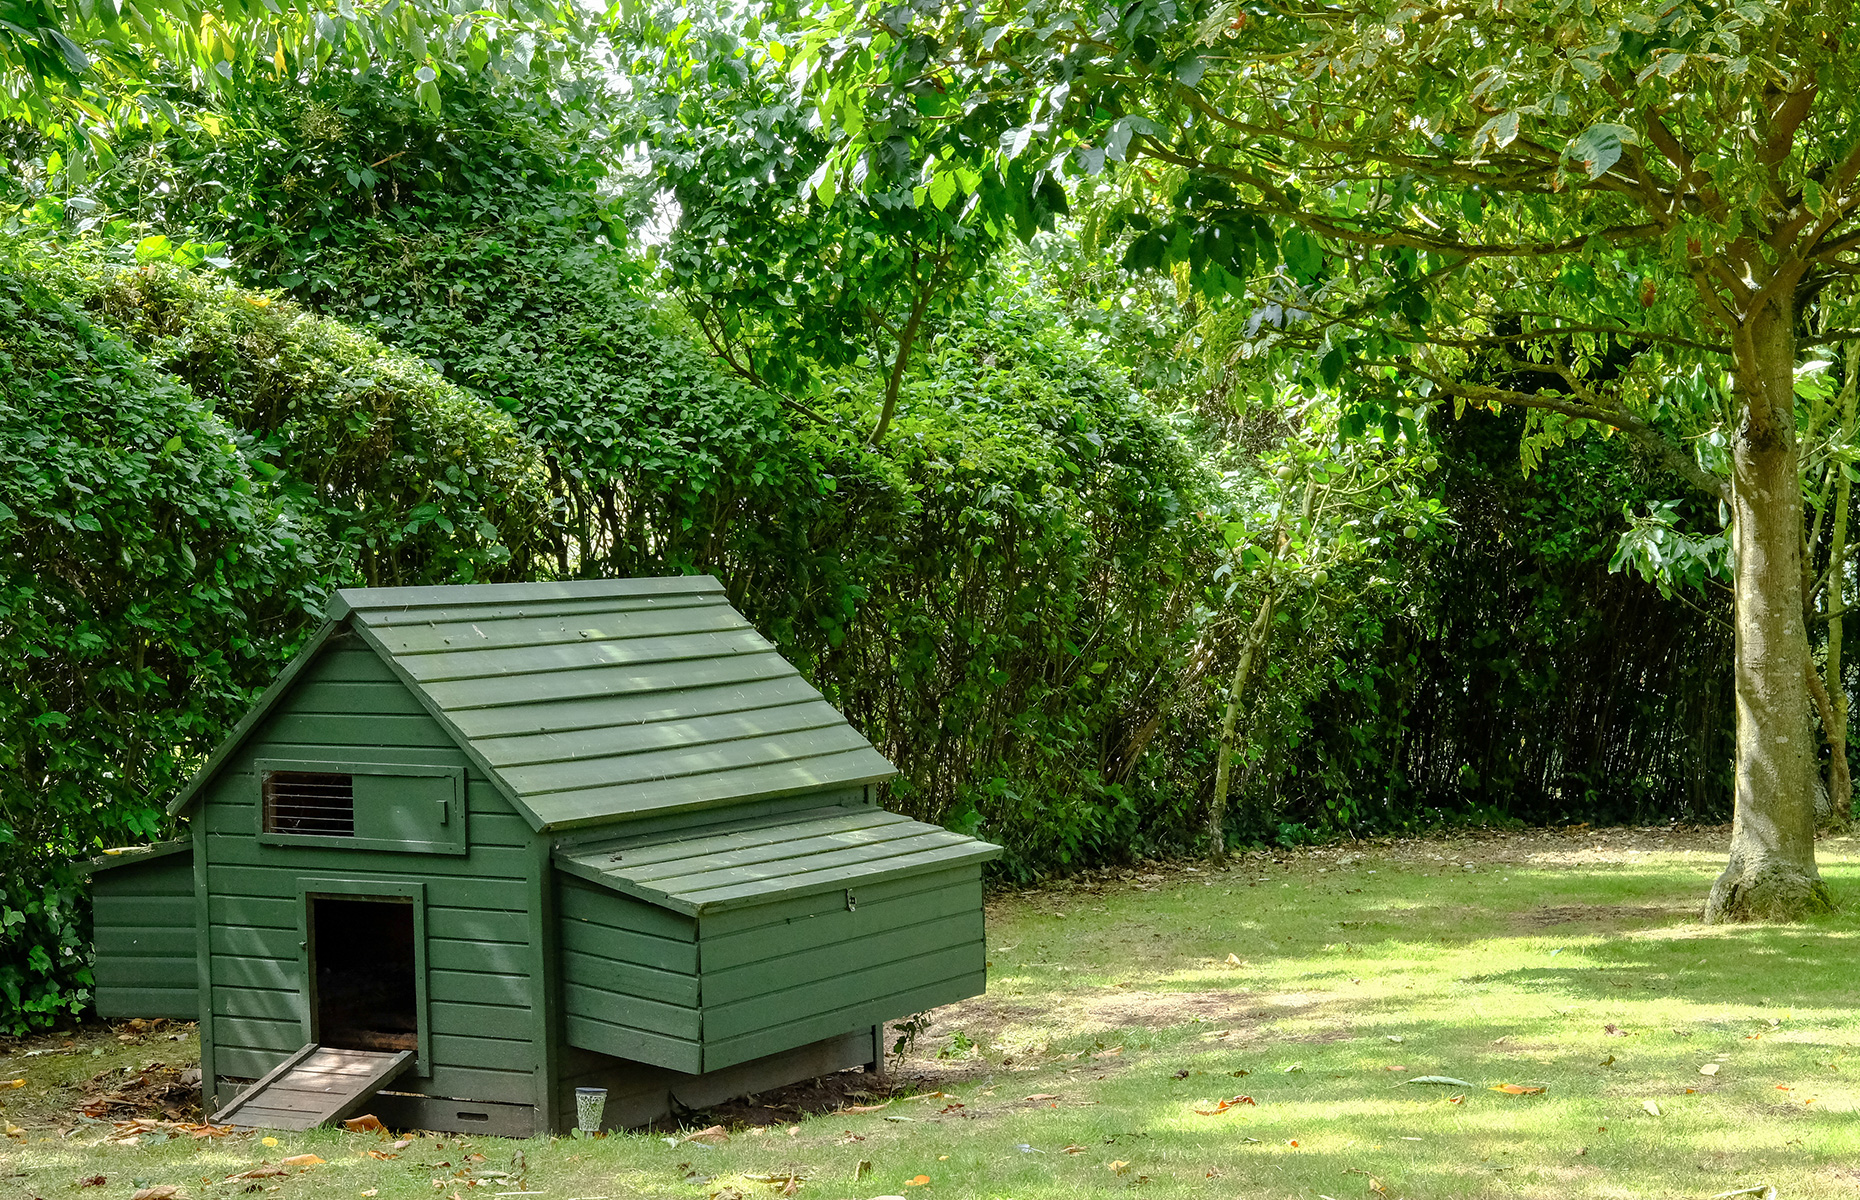 Chicken coup set up near bushes (Image: Nick Beer/Shutterstock)